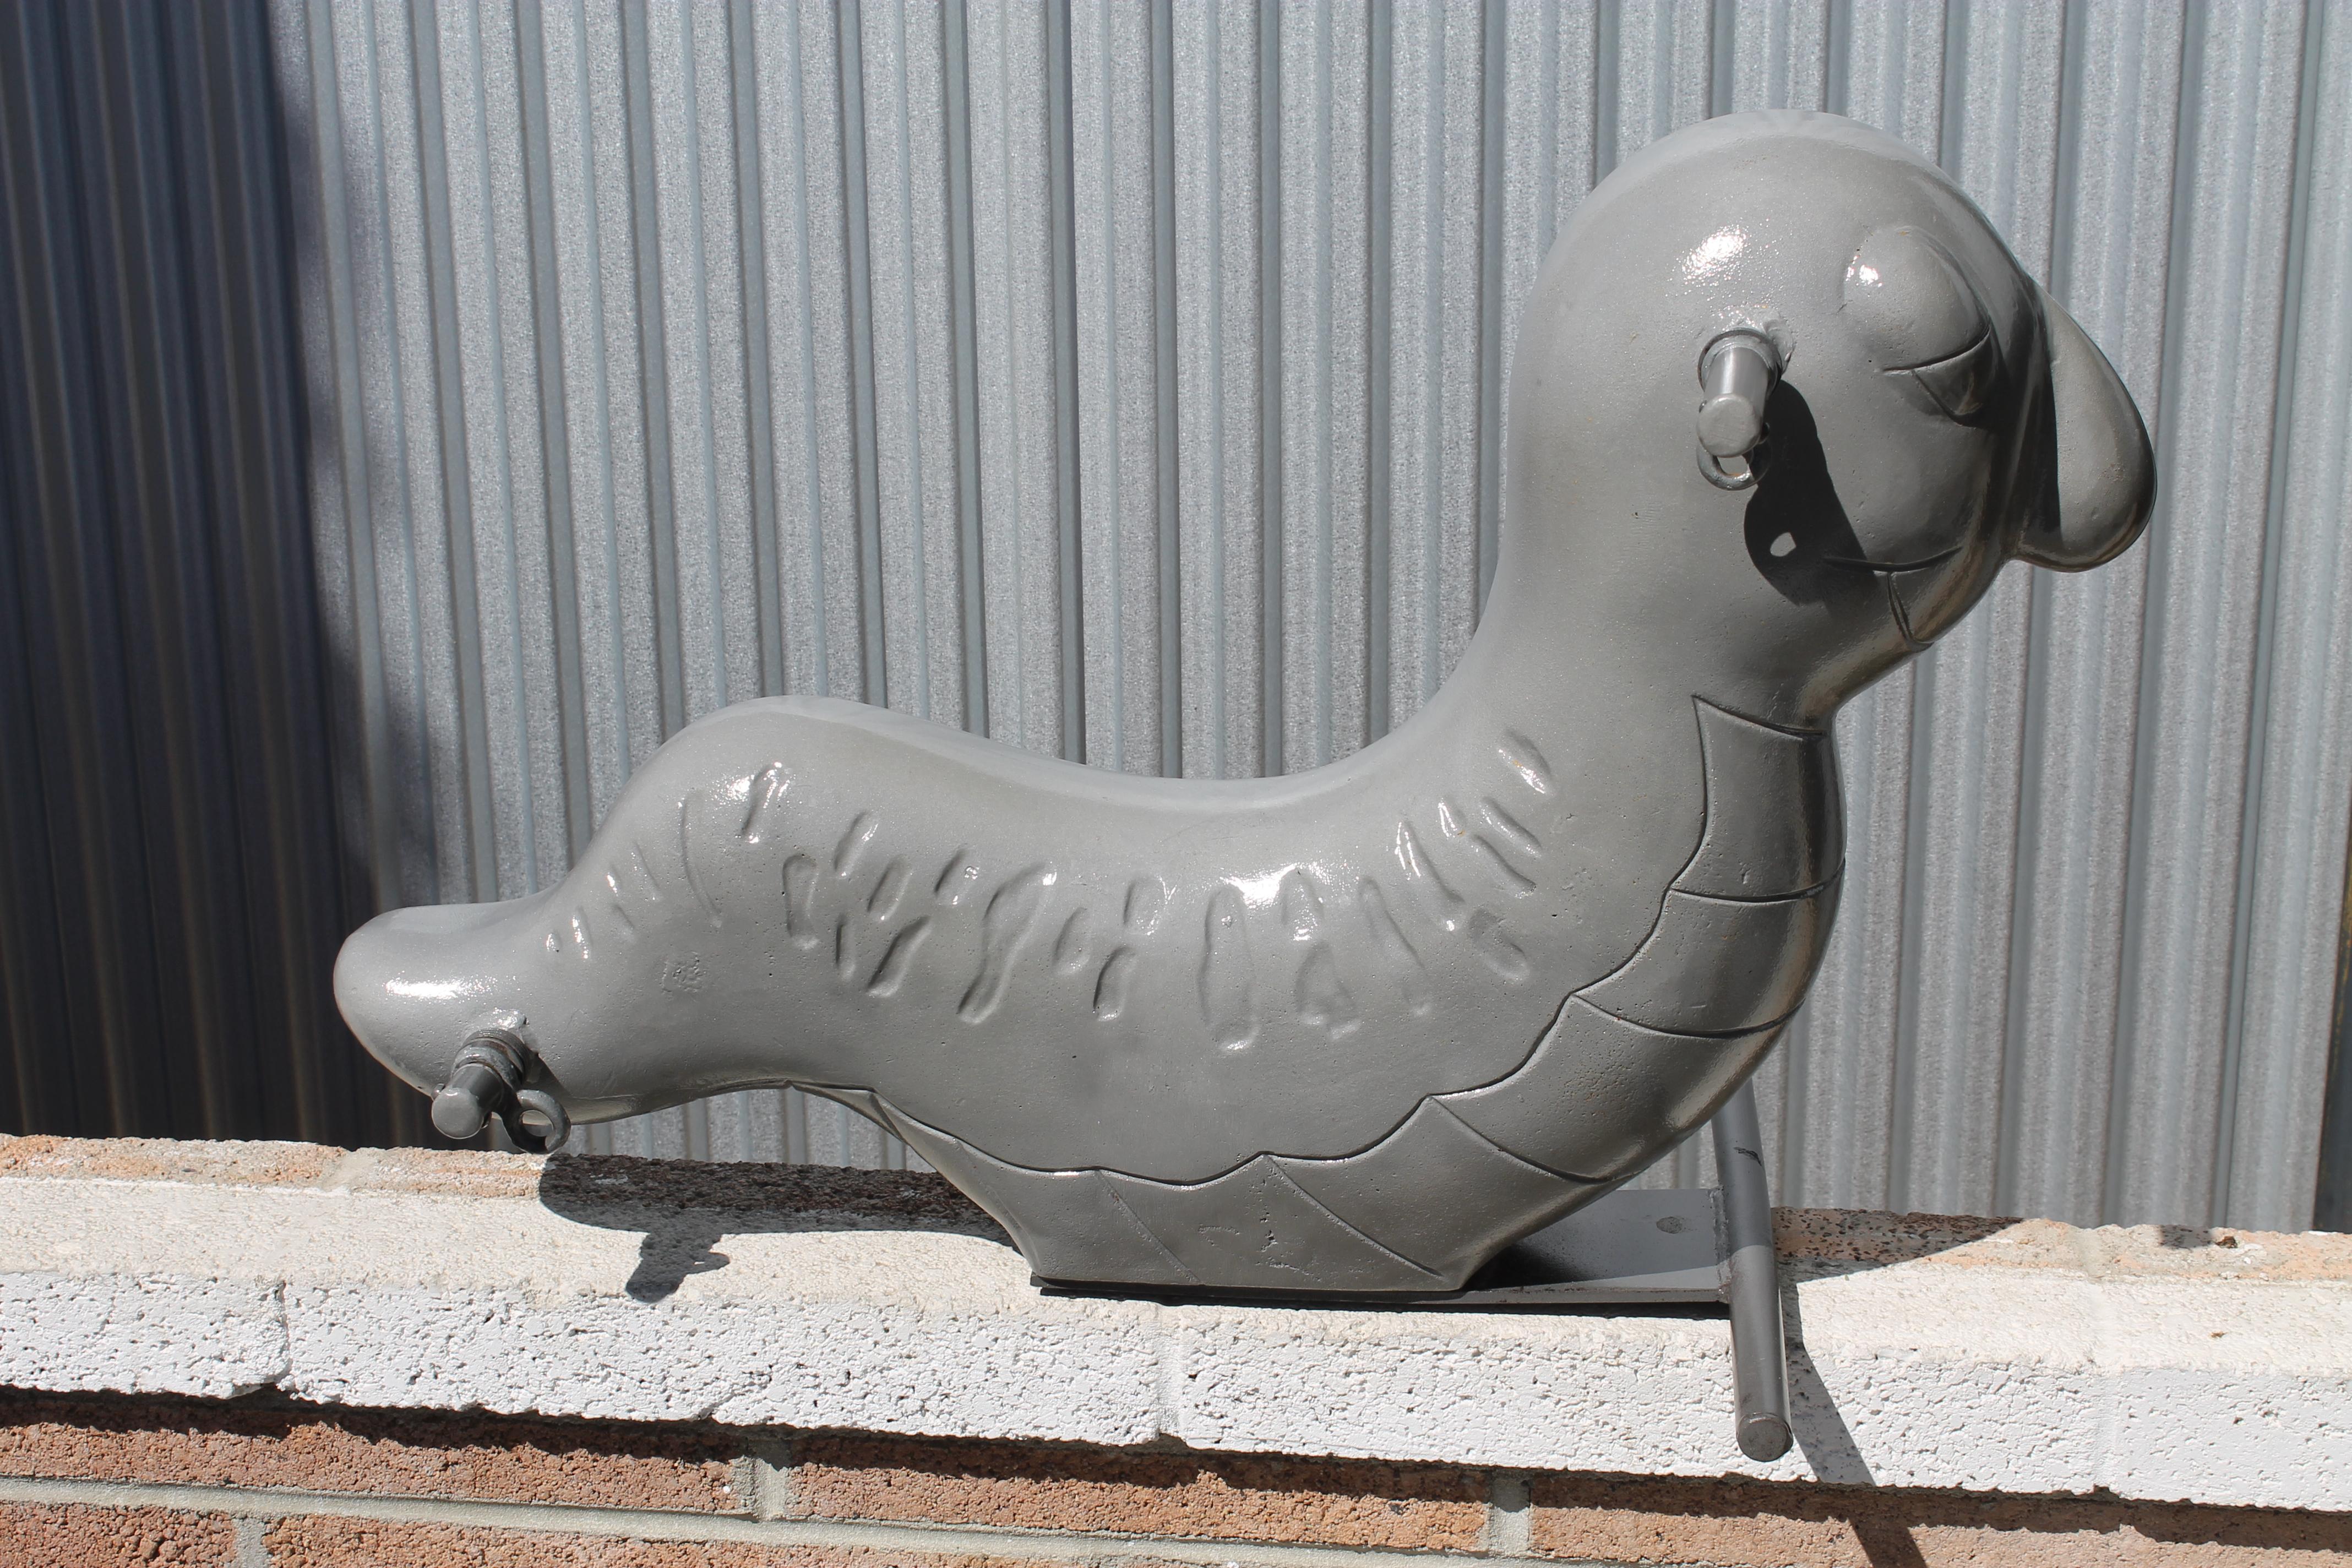 This aluminum inchworm sculpture was originally a playground spring ride located throughout parks. Spring is not included. It's more sculptural and part of Americana history. We had it sand blasted and clear coated. Inchworm measures 31